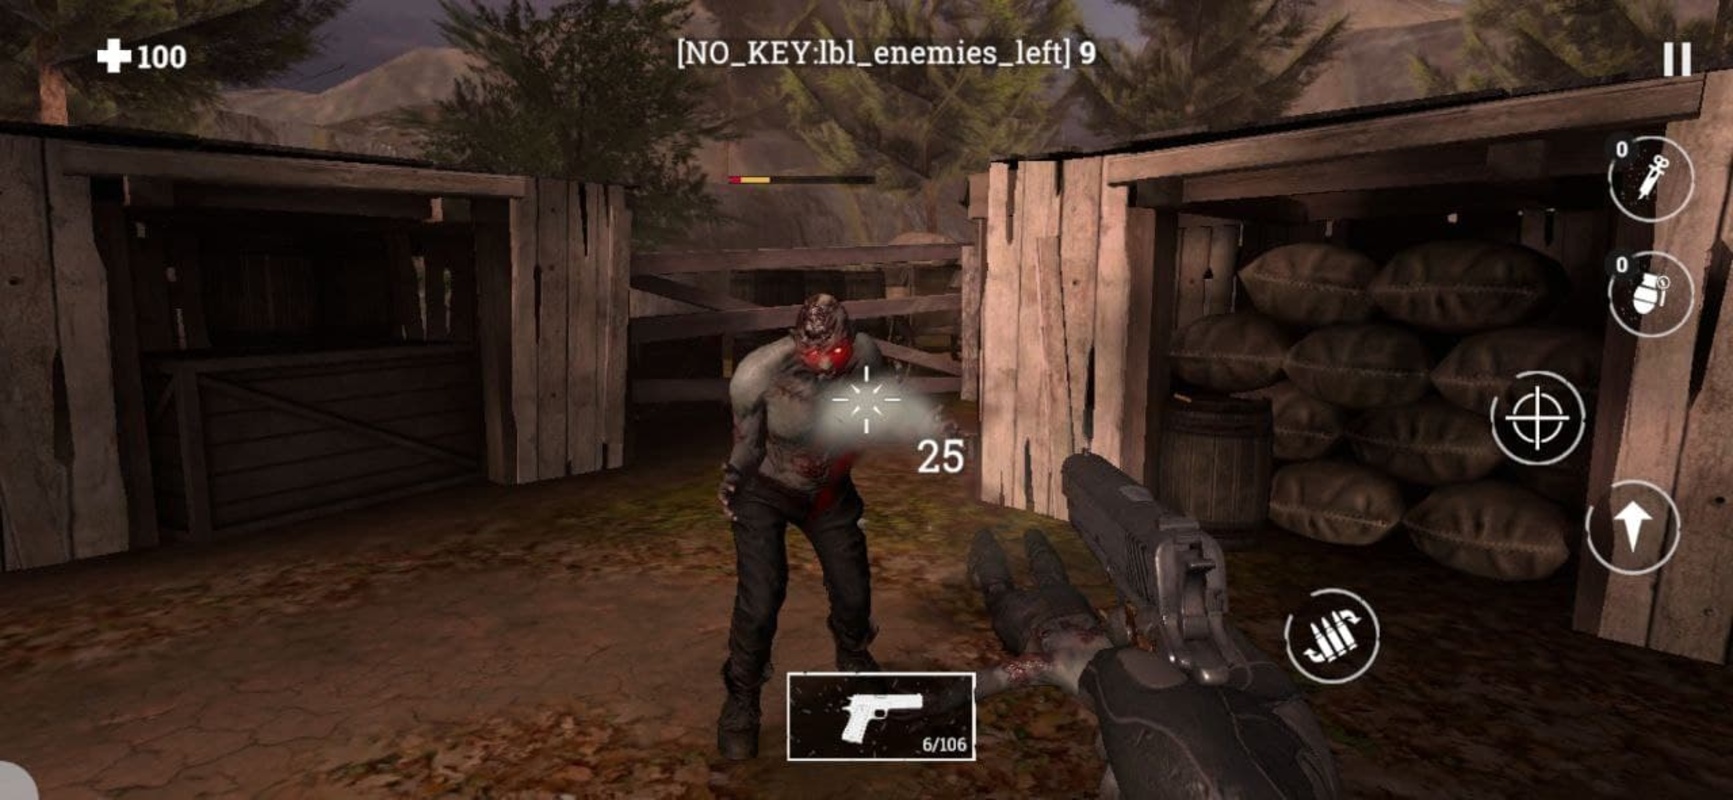 Crossfire: Survival Zombie Shooter 1.0.8 APK for Android Screenshot 10